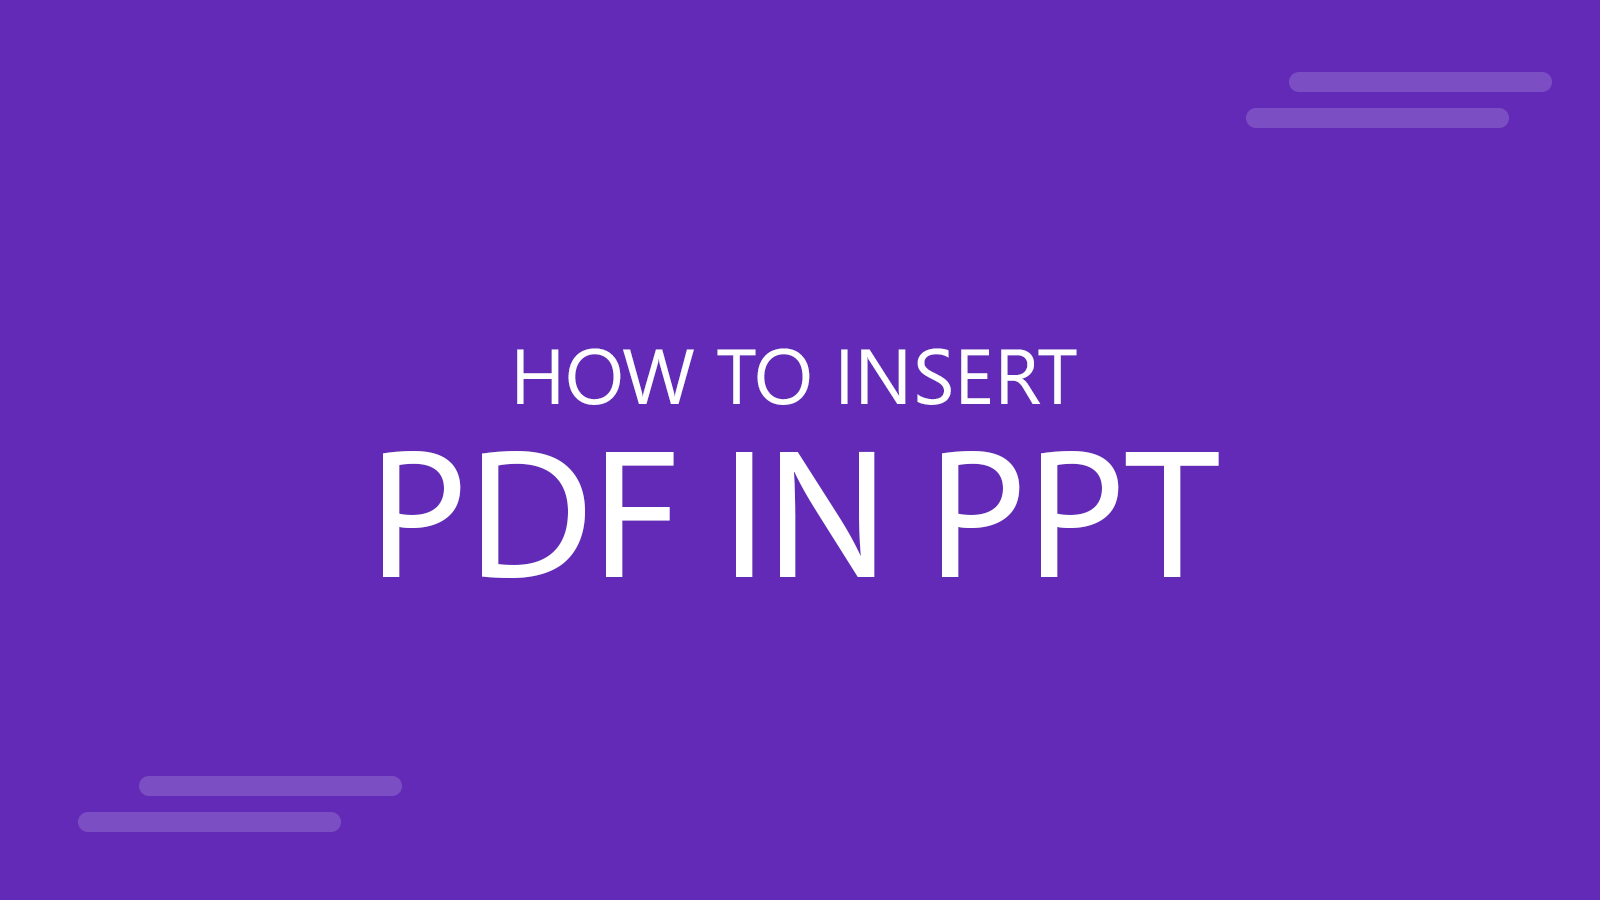 How to Insert PDF into a PowerPoint Presentation?